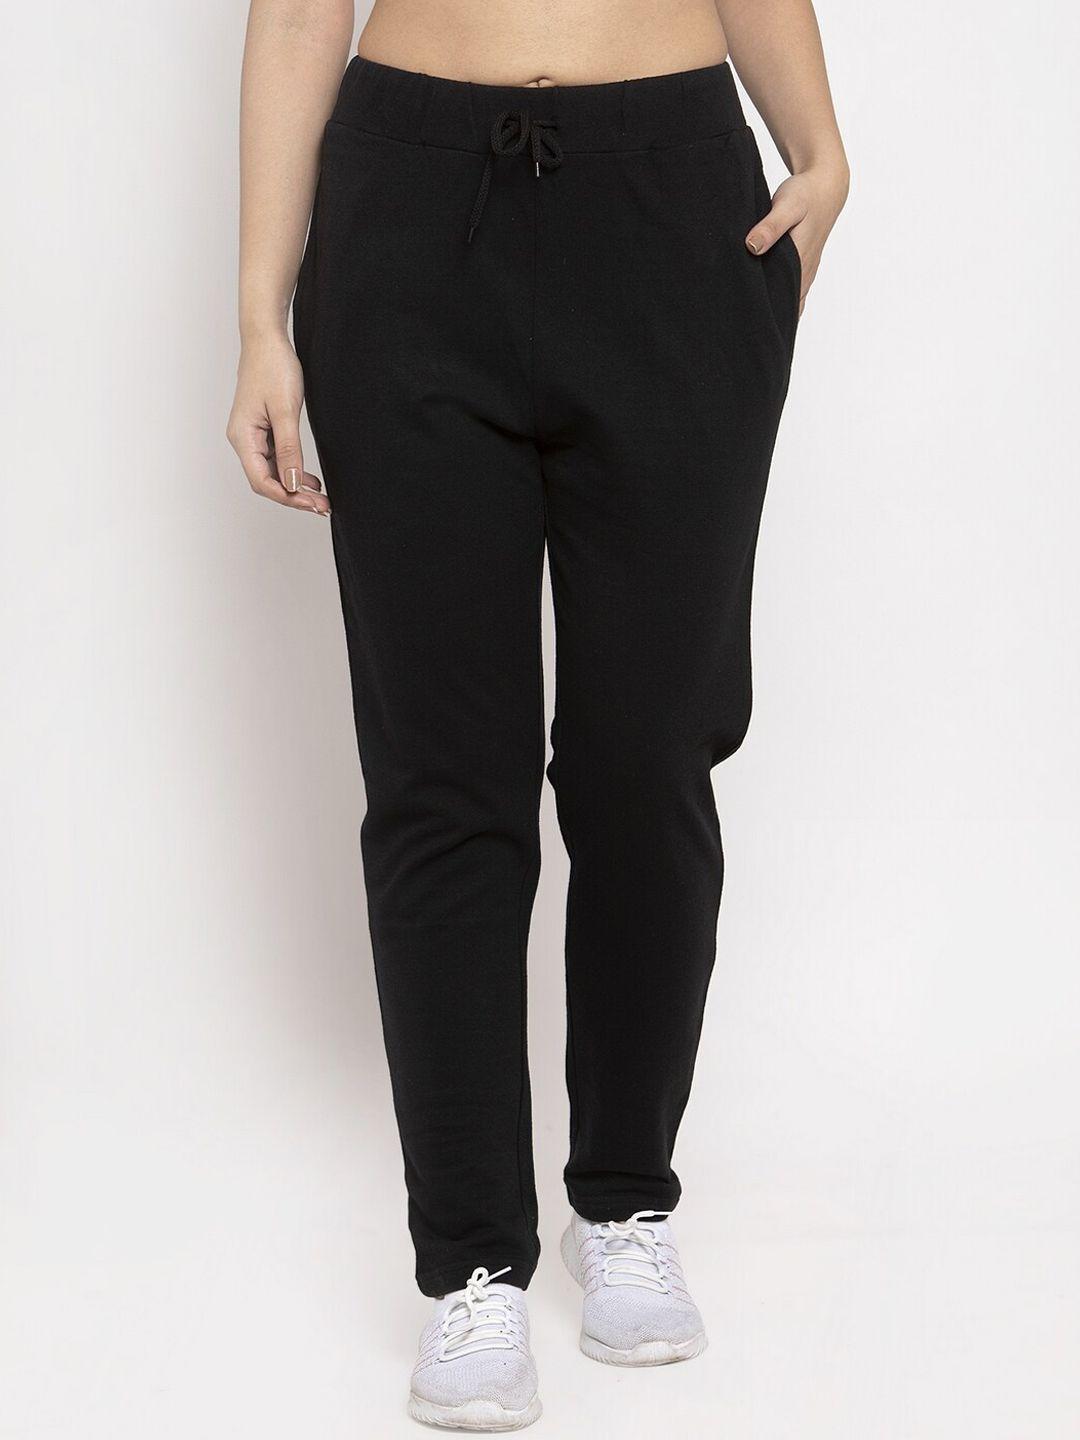 door74-women-black-solid-relaxed-fit-track-pants